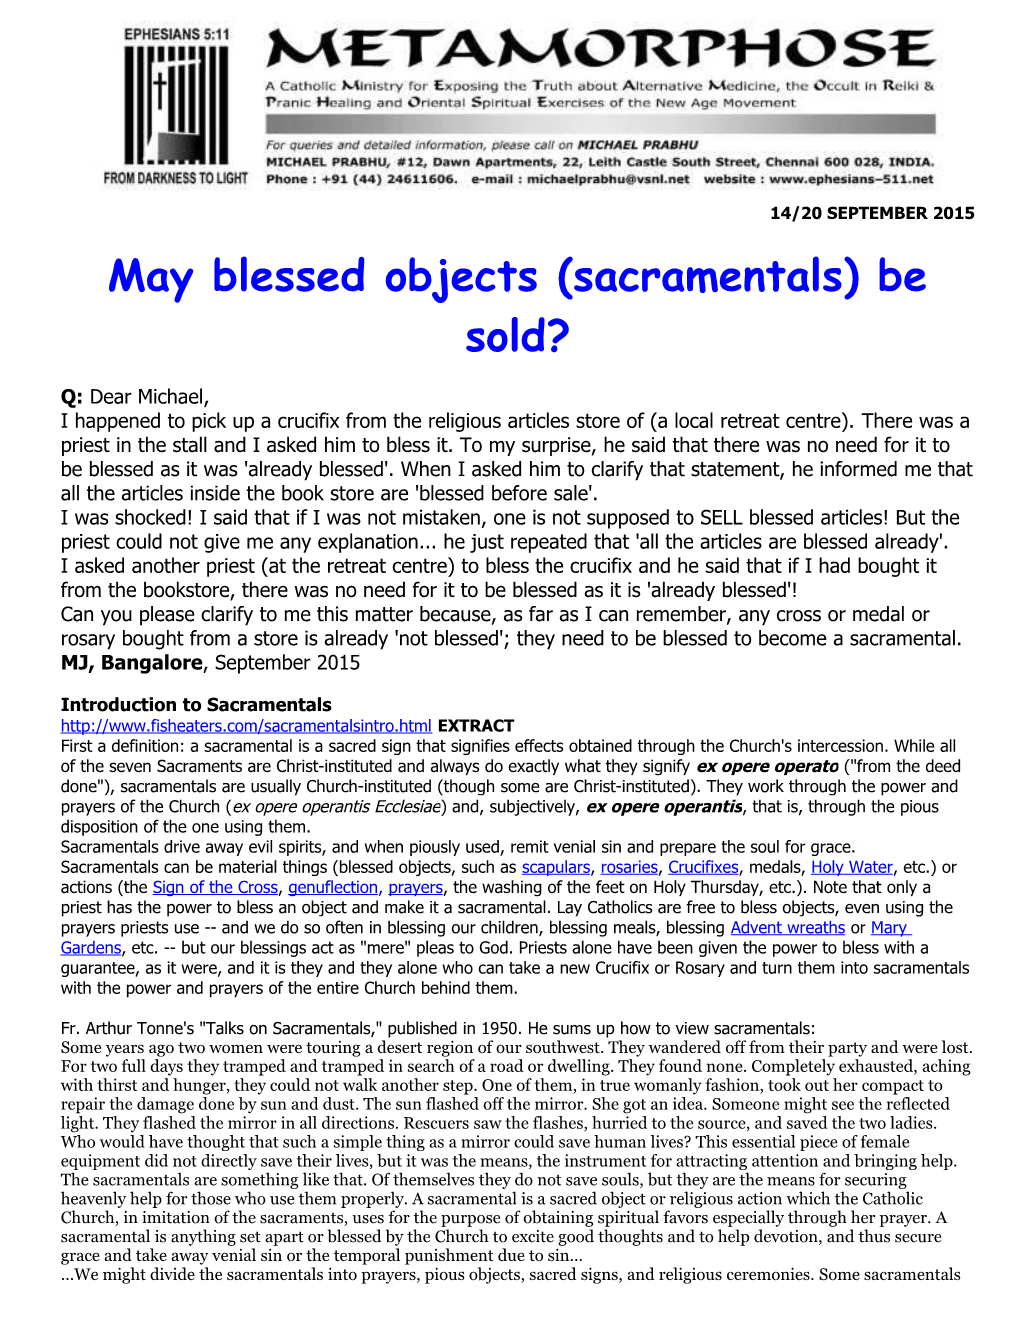 May Blessed Objects (Sacramentals) Be Sold?